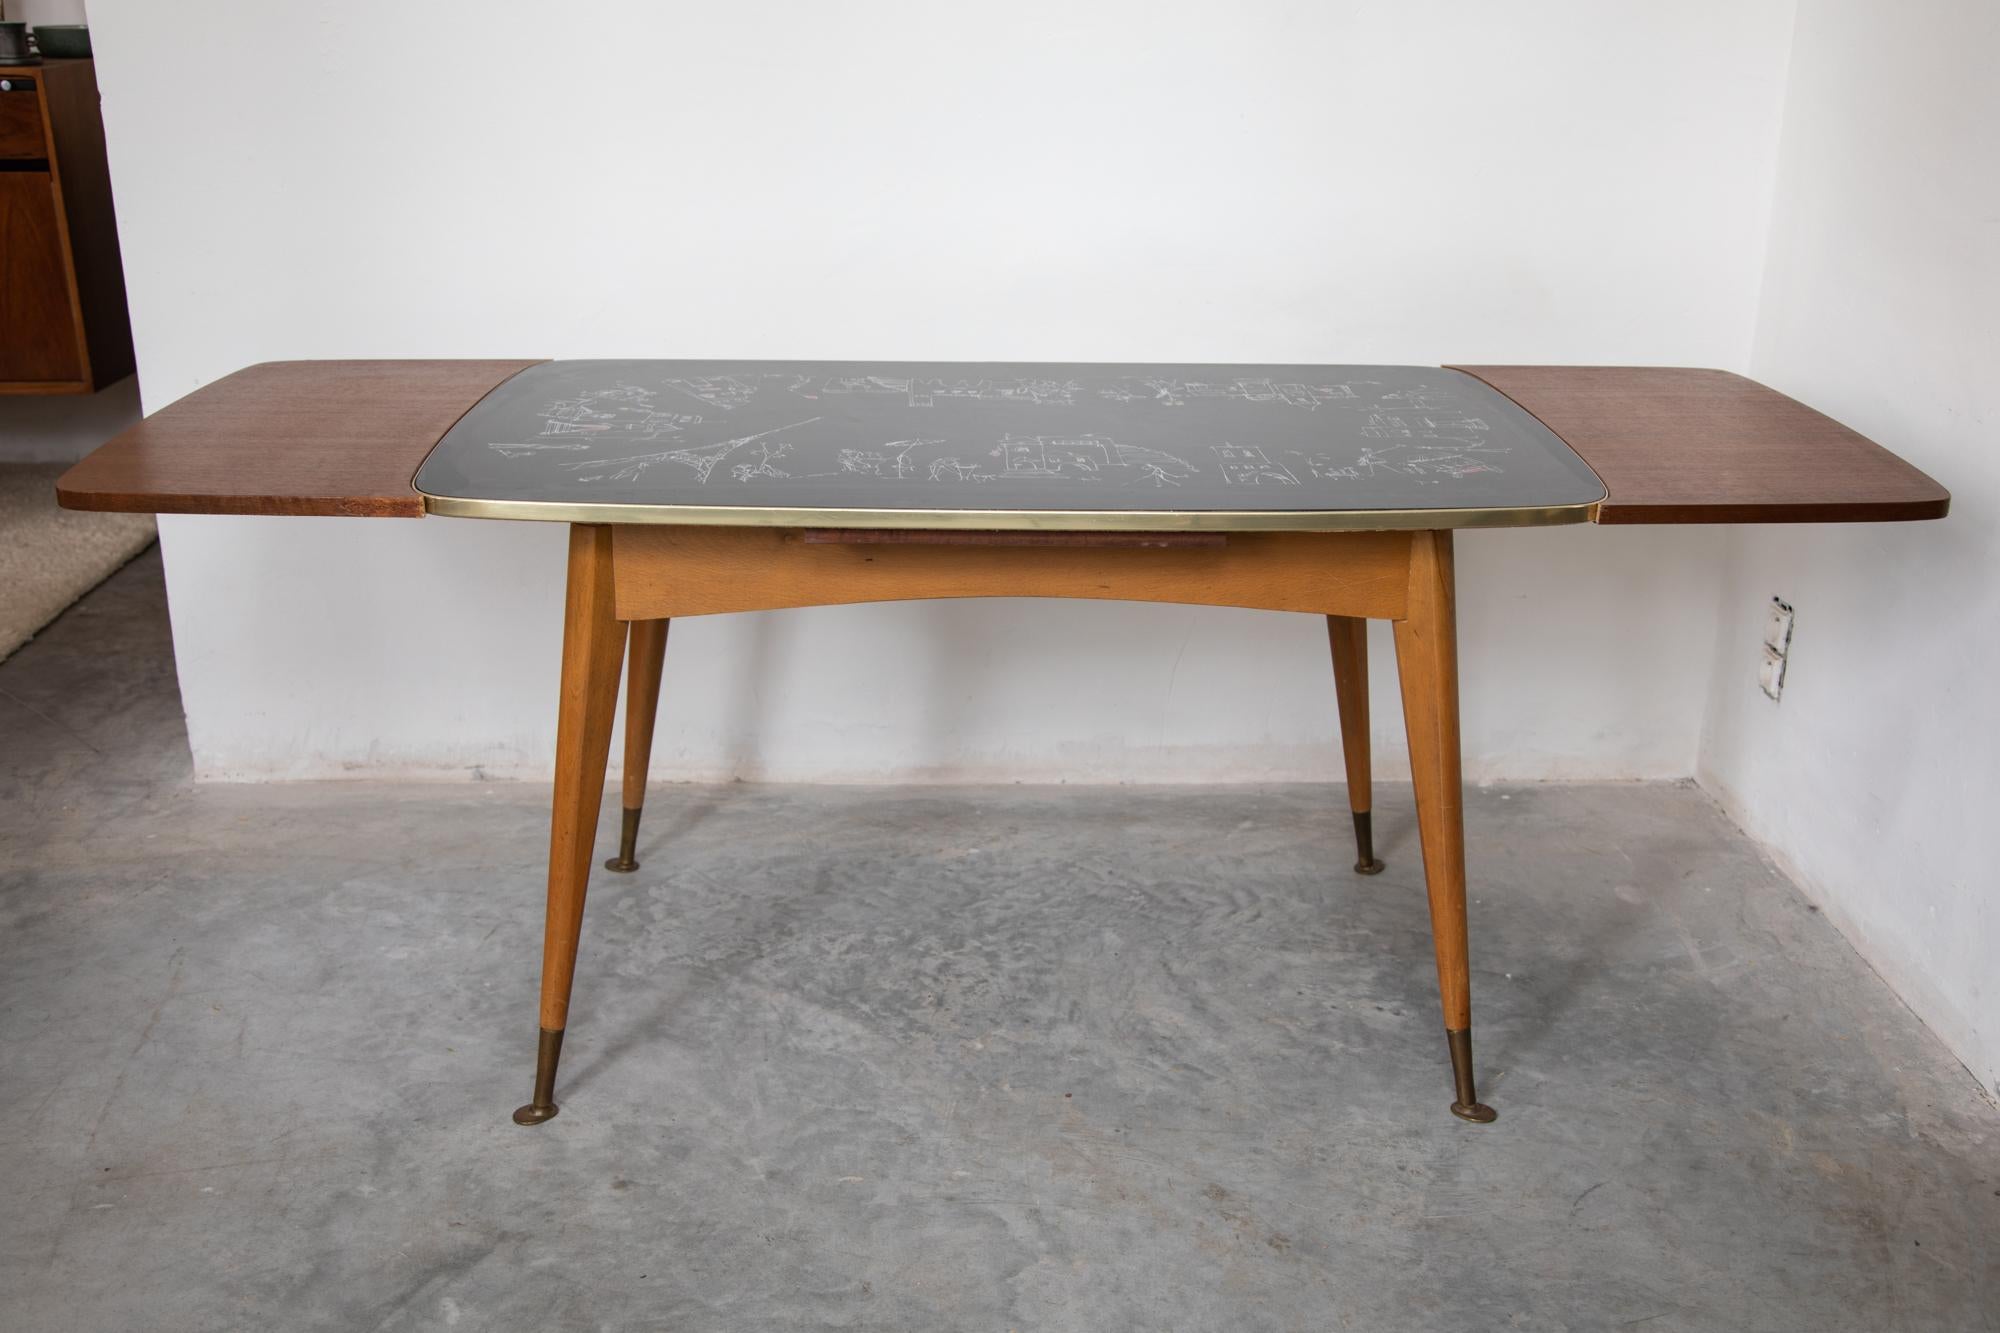 Mid-Century Modern Adjustable Coffee or Dining Table with Graphic Parisian Scene, 1950s